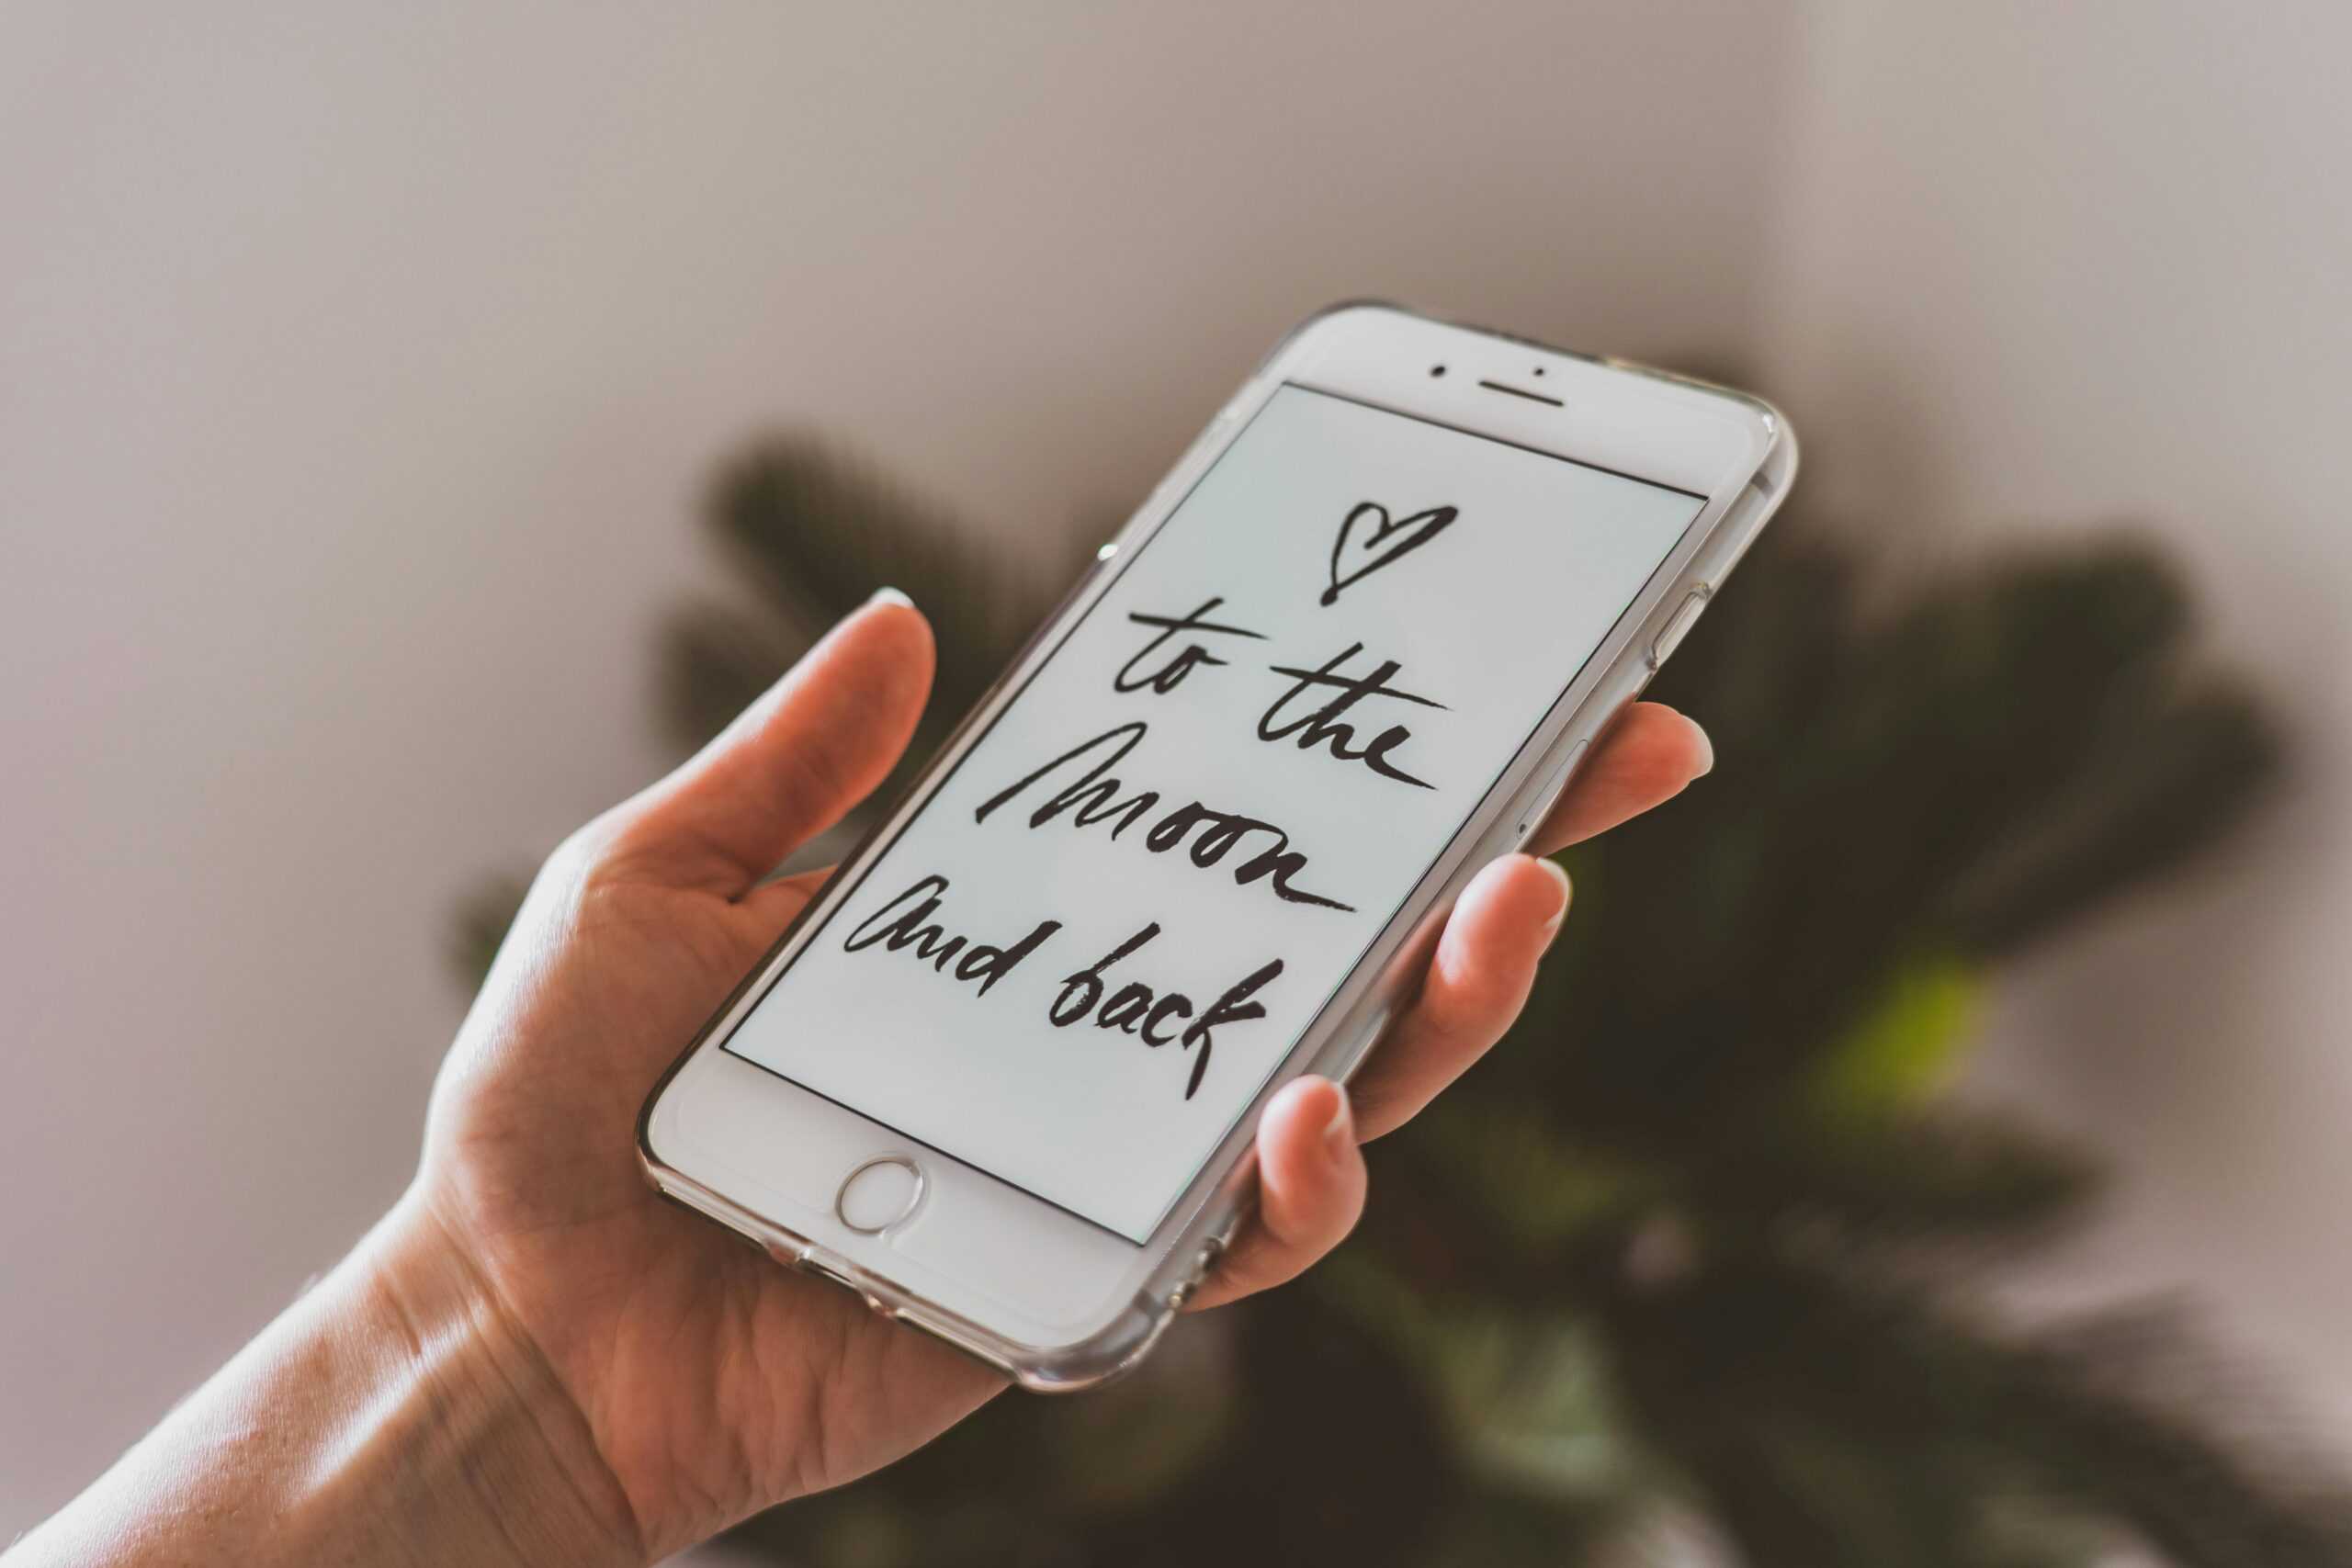 A hand holding a smartphone displaying the message "to the moon and back" with a heart and blurred plant background, symbolizing effective communications.